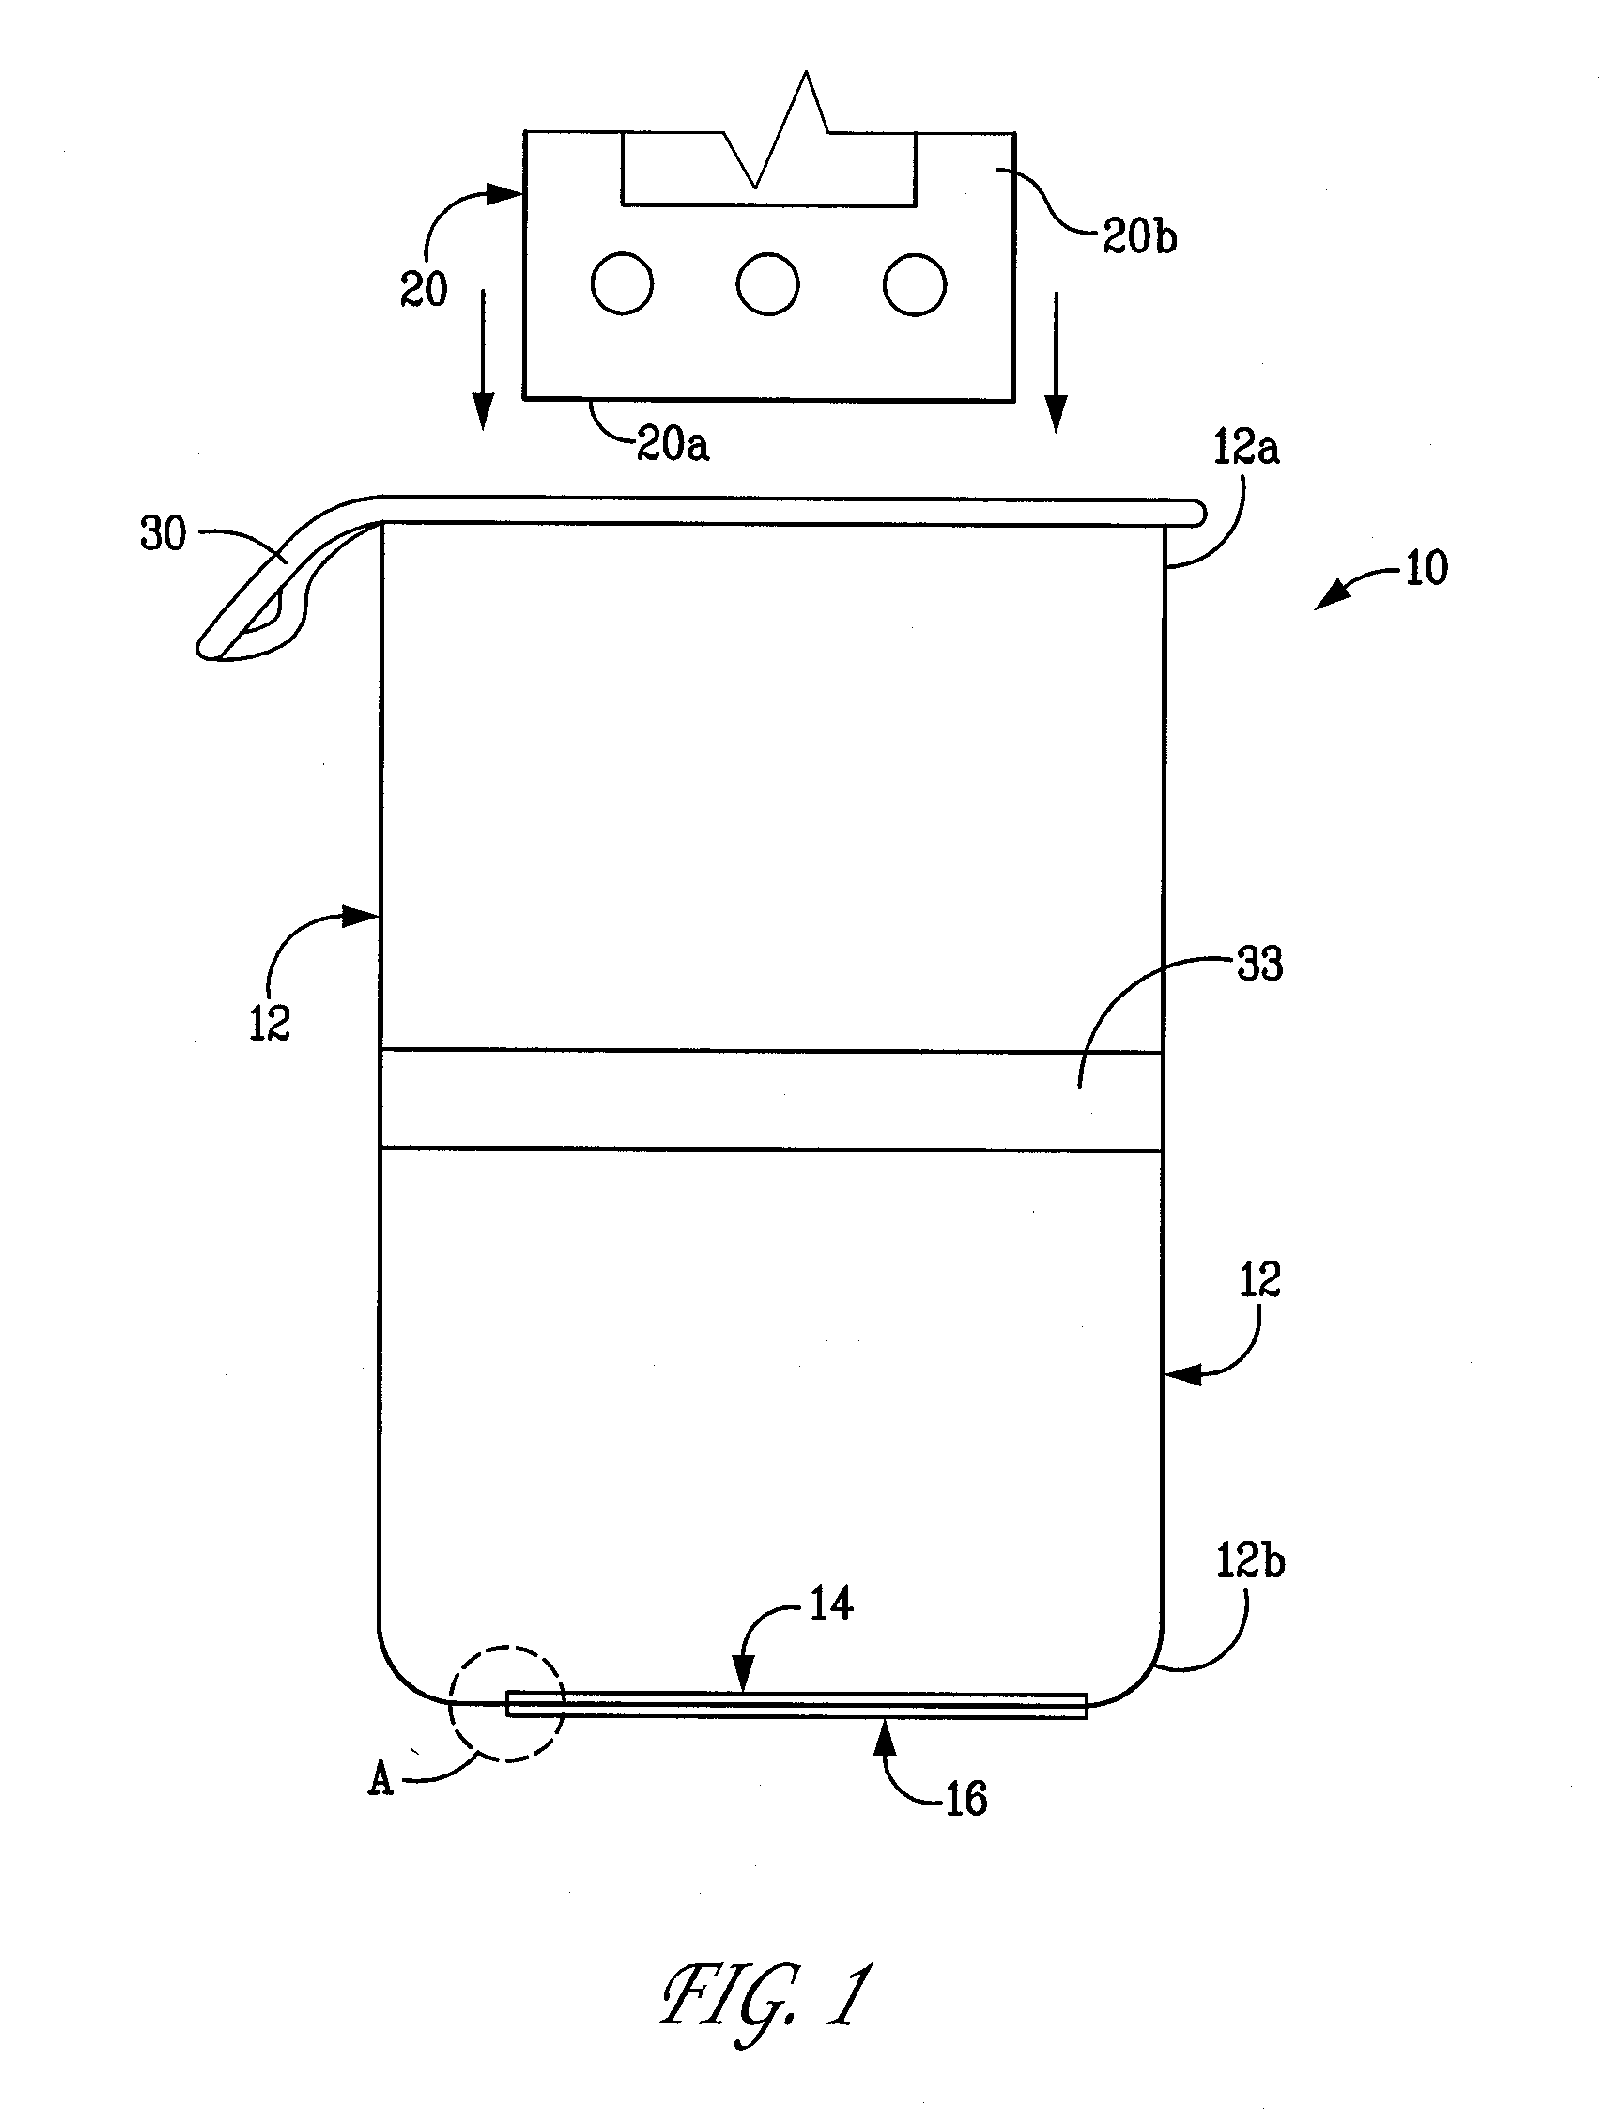 Devices for covering ultrasound probes of ultrasound machines